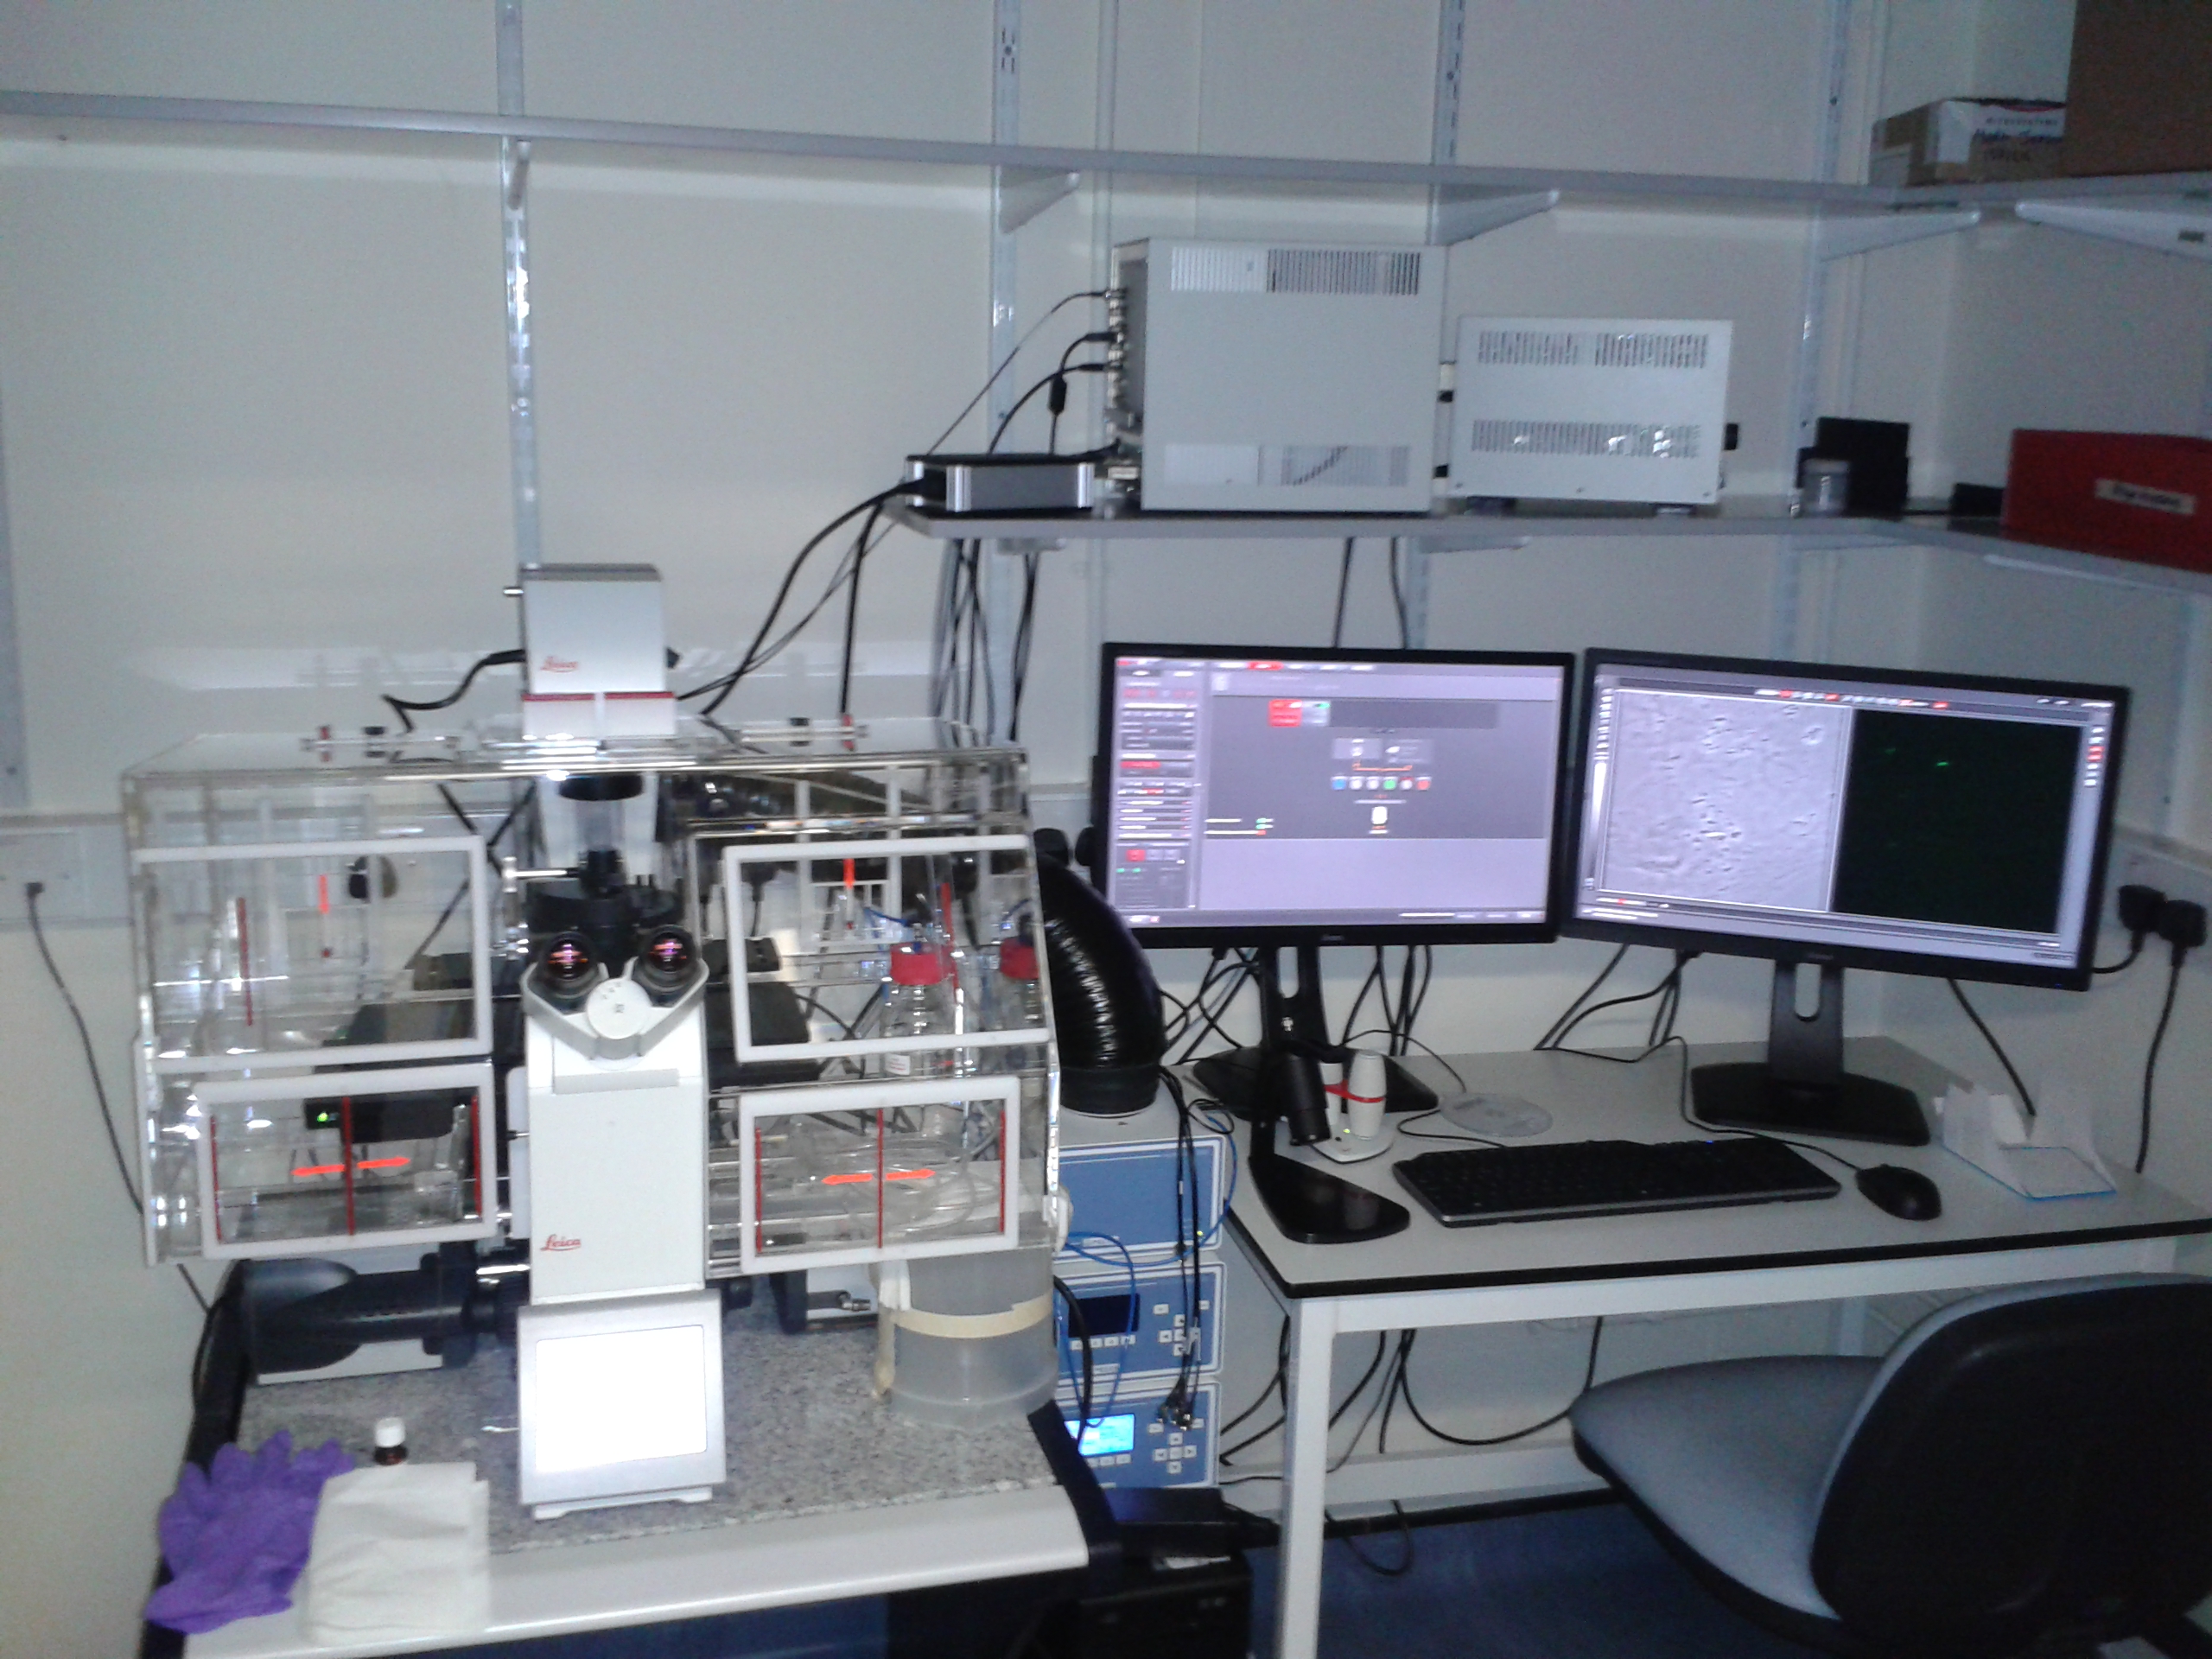 Widefield microscope system